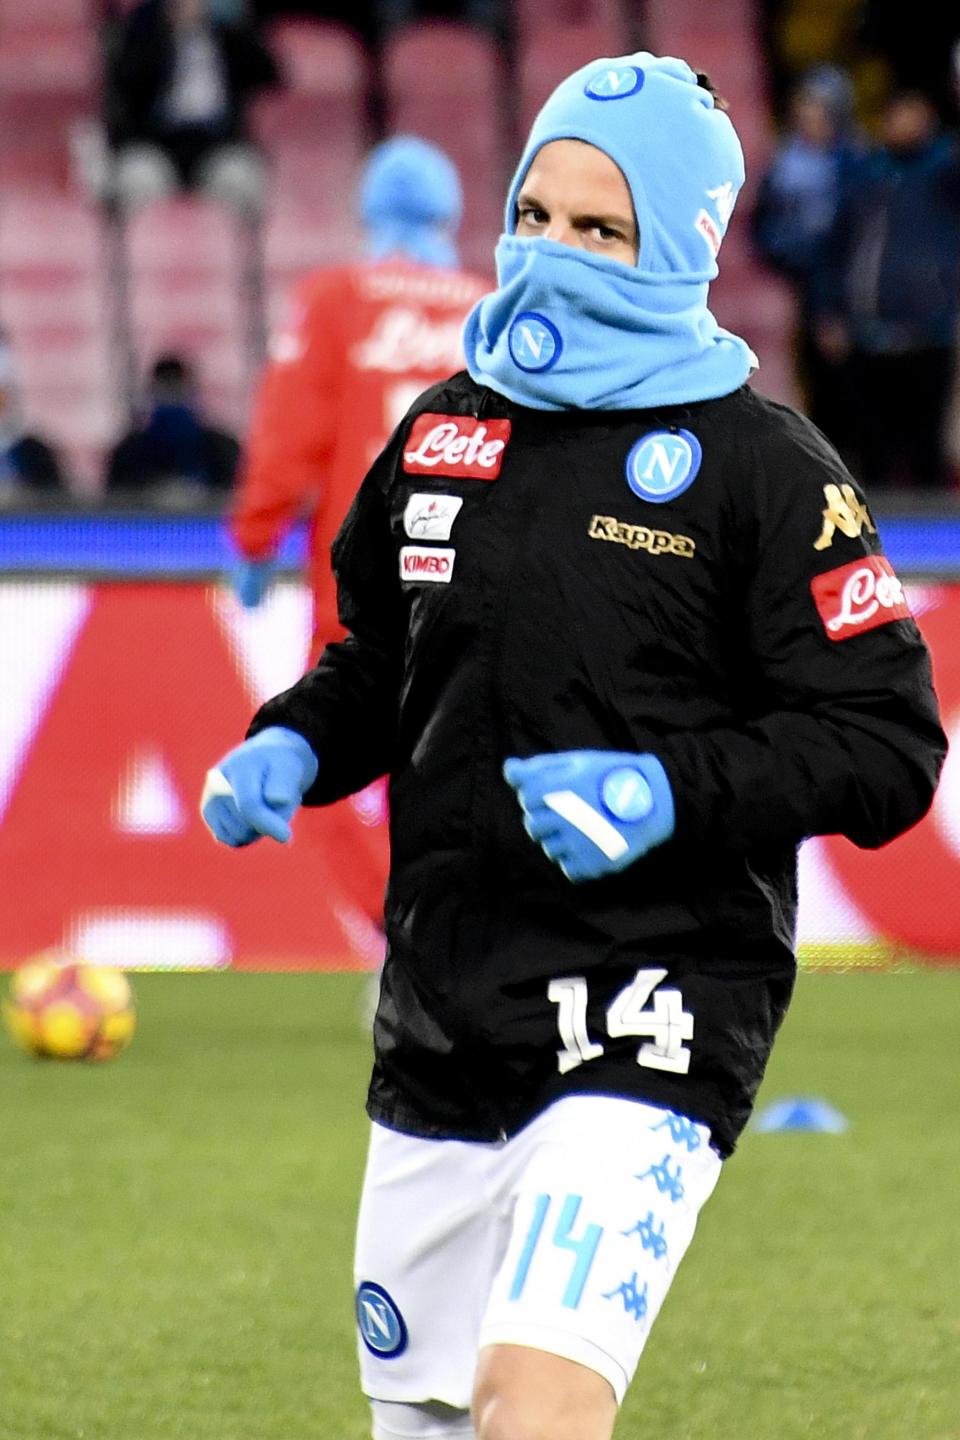 Napoli's Dries Mertens warms up prior to the start of an Italian Serie A soccer match between Napoli and Sampdoria at the San Paolo stadium in Naples, Saturday, Jan. 7, 2017. (Ciro Fusco/ANSA via AP)